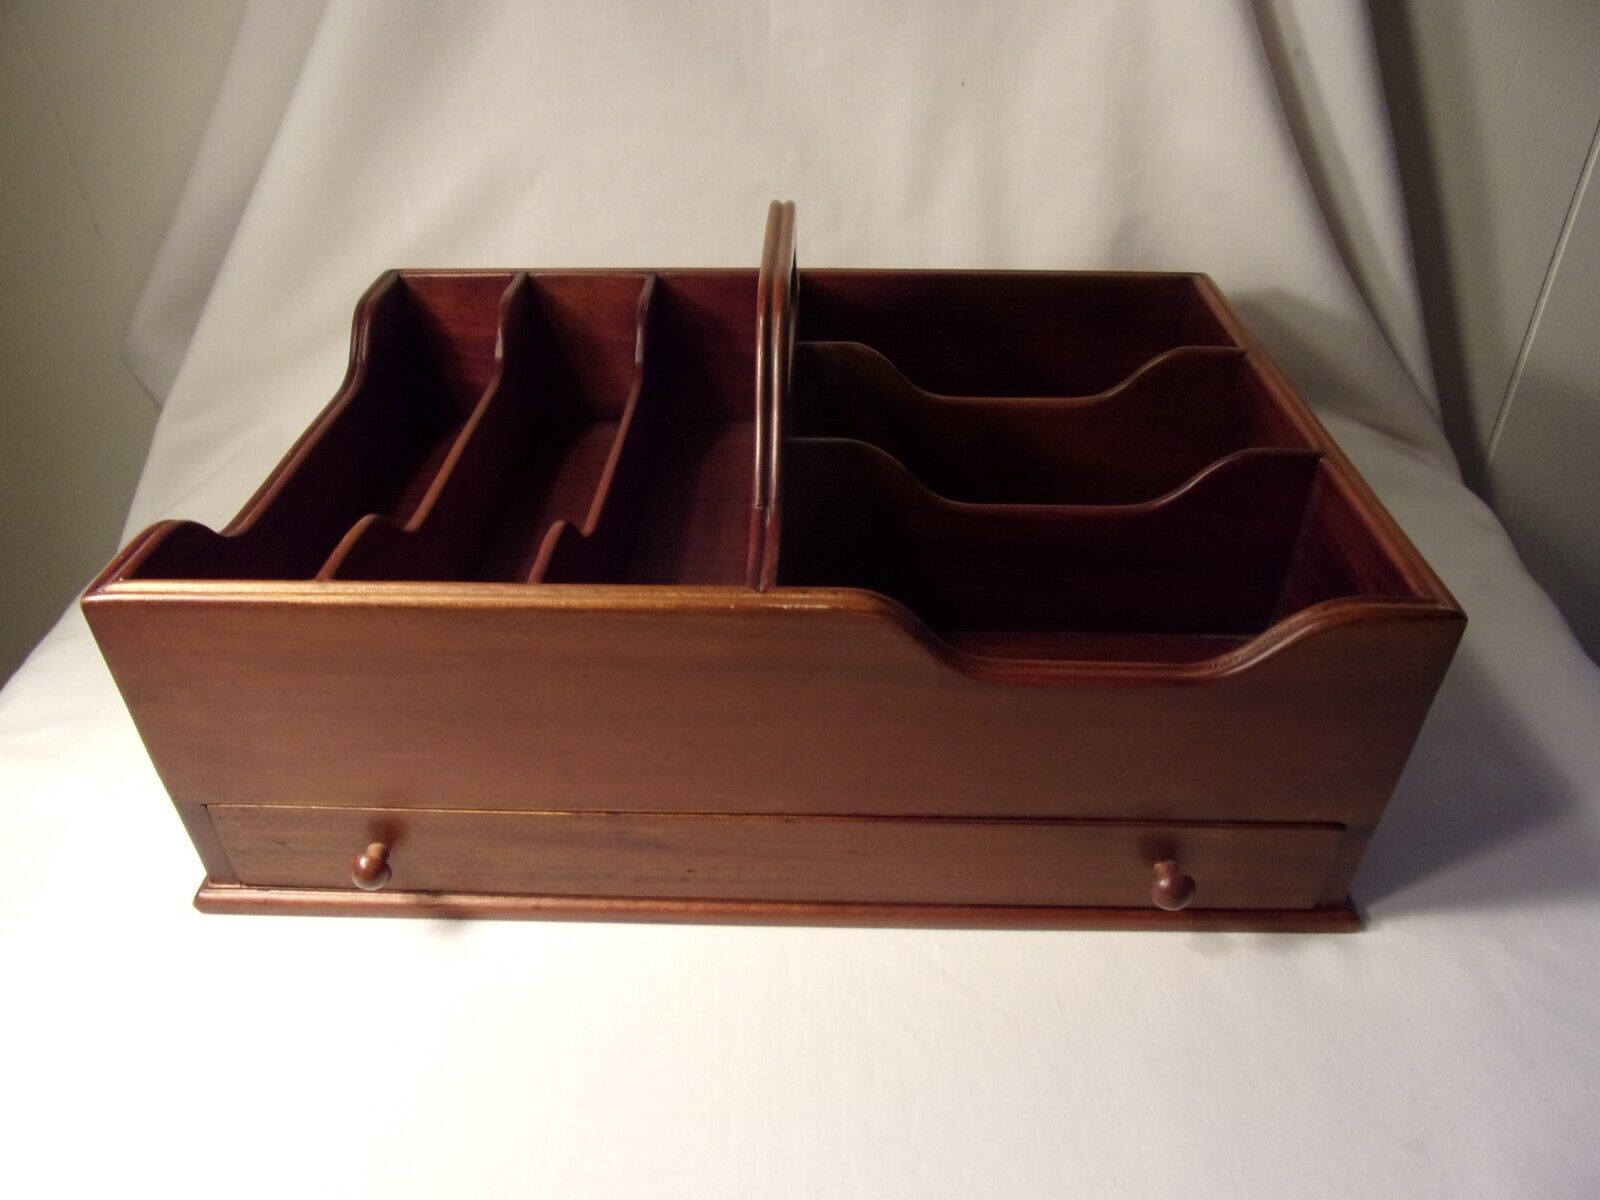 Rare Vintage Froelich Furniture Handcrafted Mahogany Desk Top Organizer W Drawer